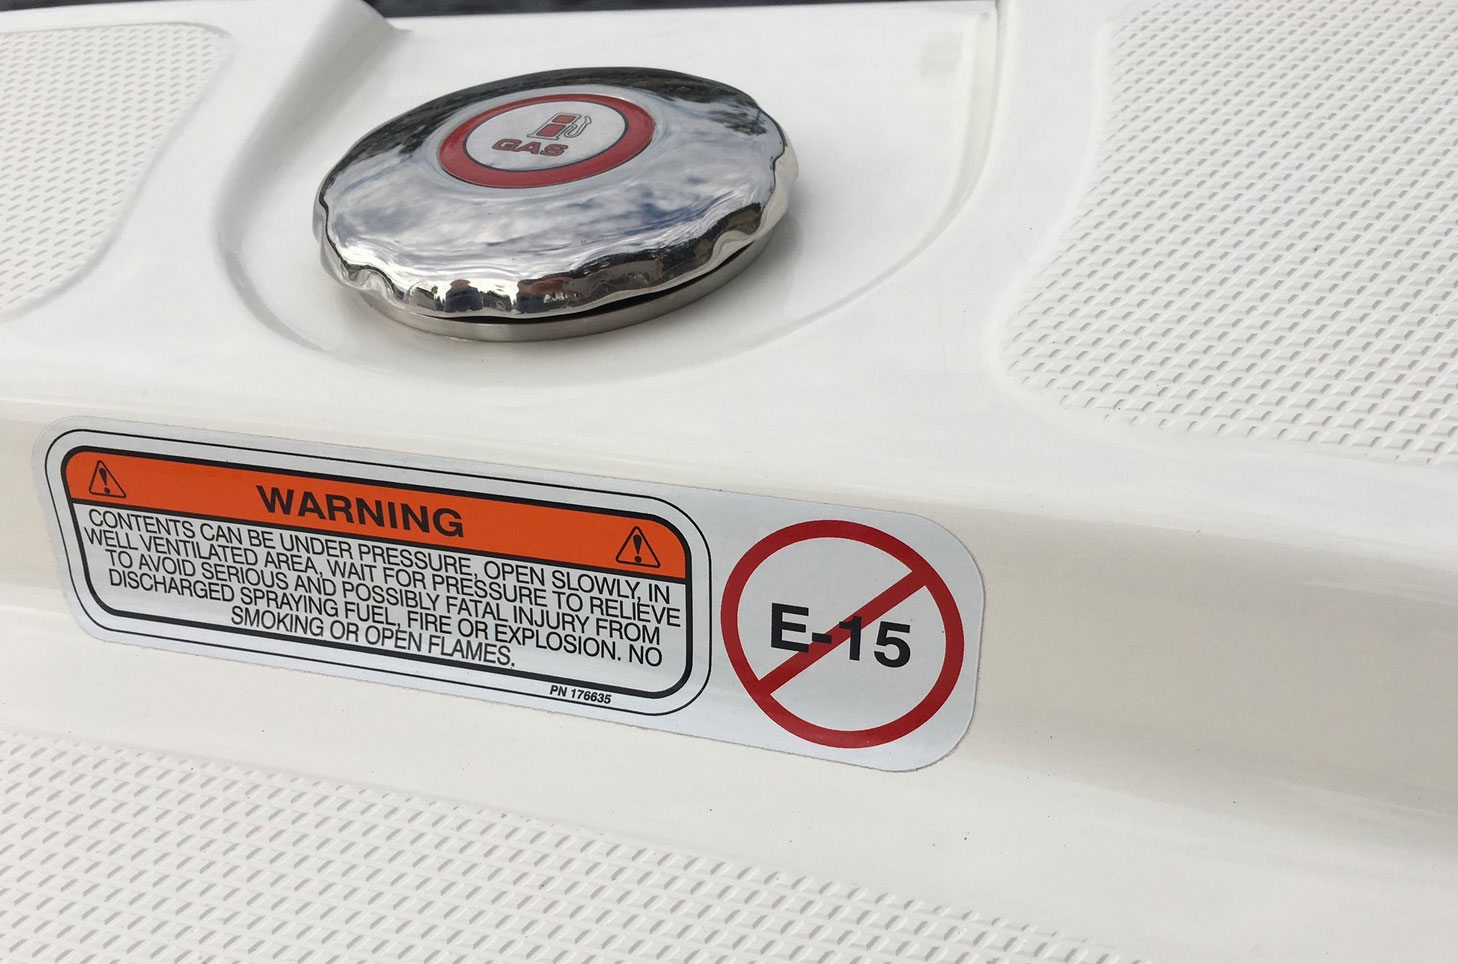 E15 is federally prohibited for recreational vessel use, according to the Coast Guard.